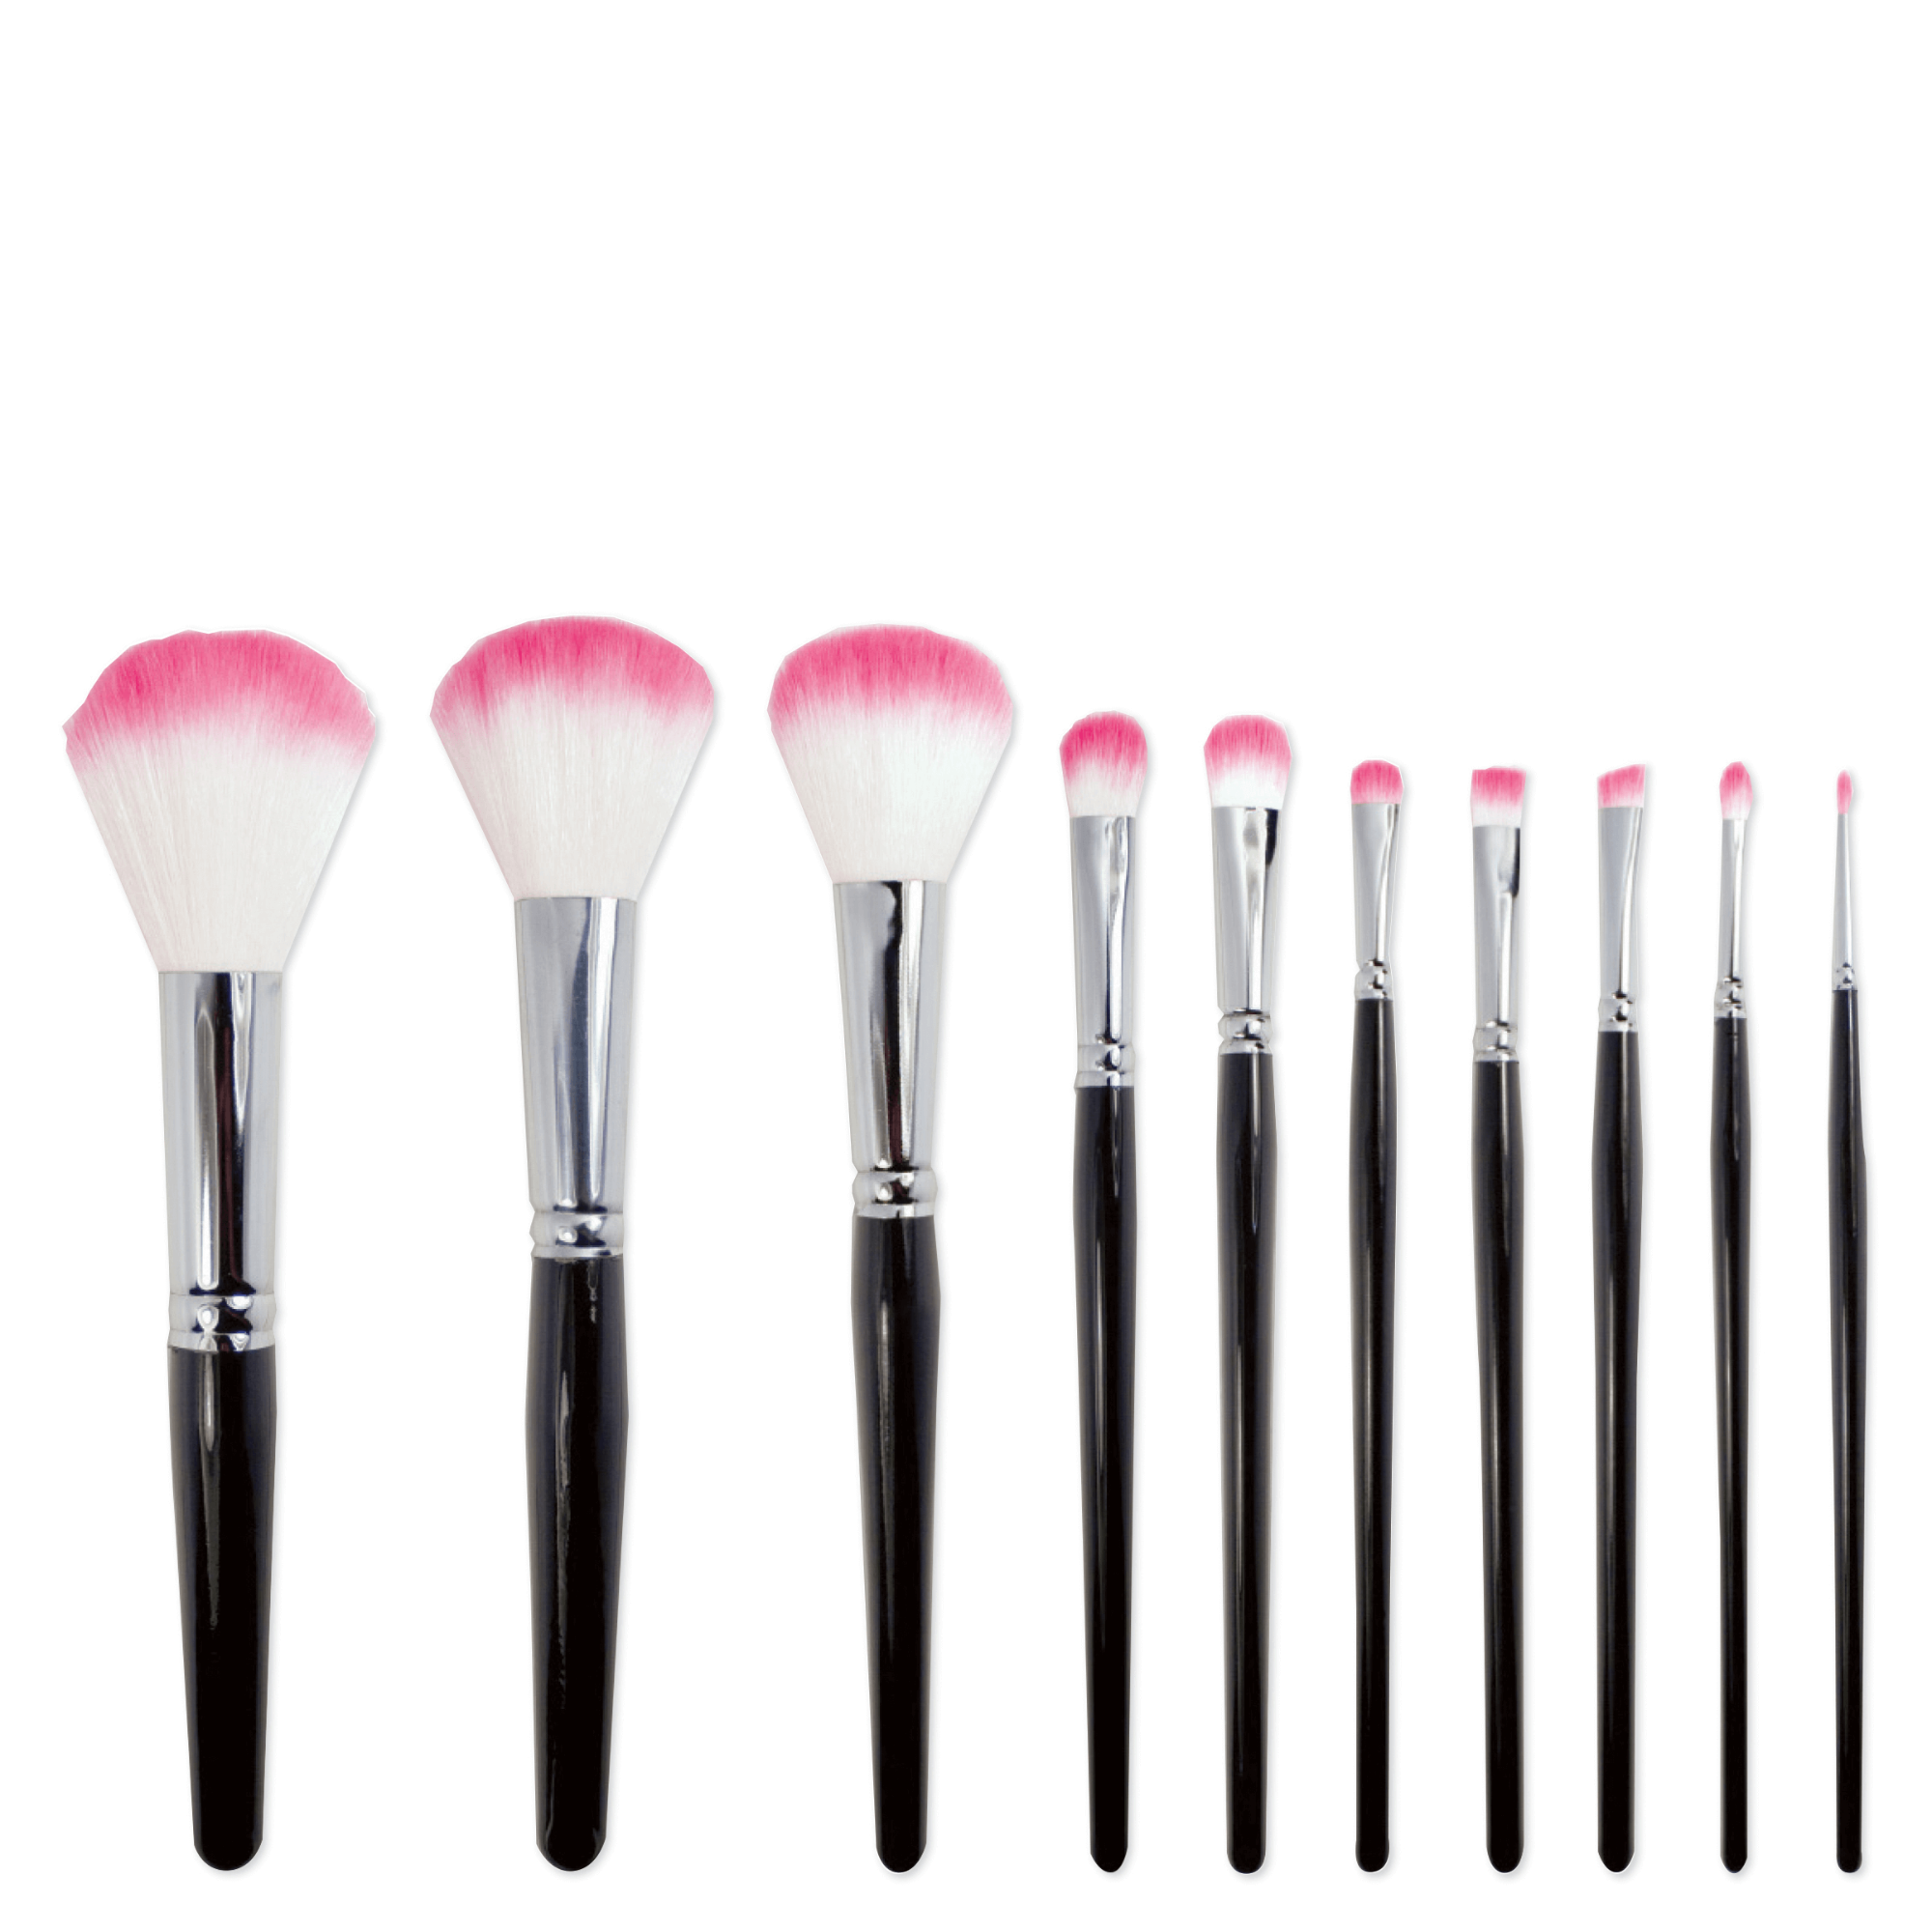 Synthetic Makeup Brush Set with Case - 10 pc.